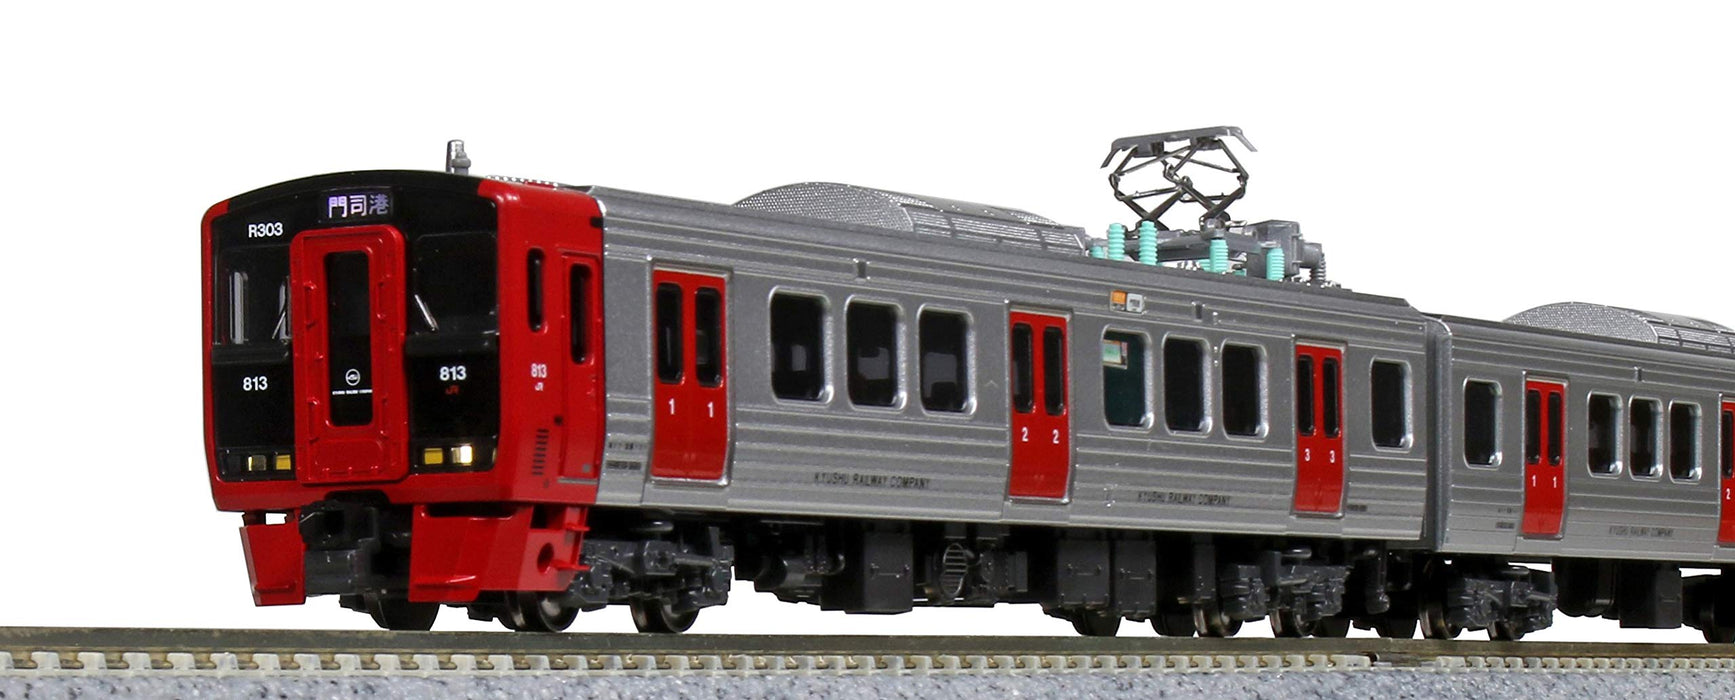 Kato N Gauge 813 Series 6-Car Set Model Train Special Project Product 10-1689